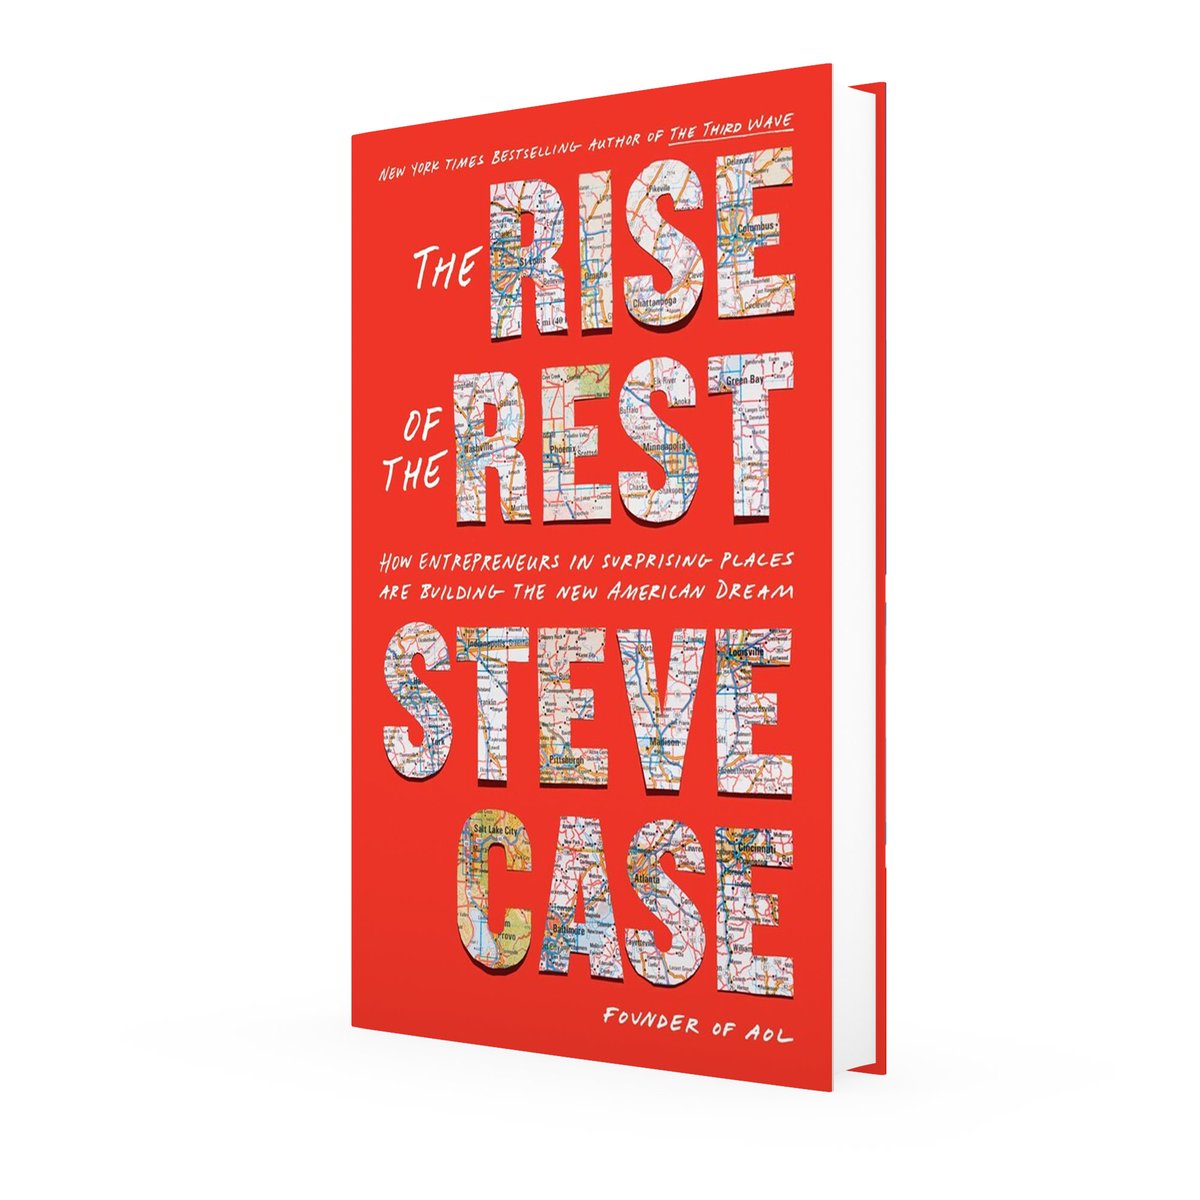 Coming up: @BretBaier sits down to talk with @SteveCase about #RiseOfRestBook at 6:25 tonight on @FoxNews. They are sure to talk about the often overlooked entrepreneurs building groundbreaking companies in communities all across America and I hope you will tune in. So inspiring!